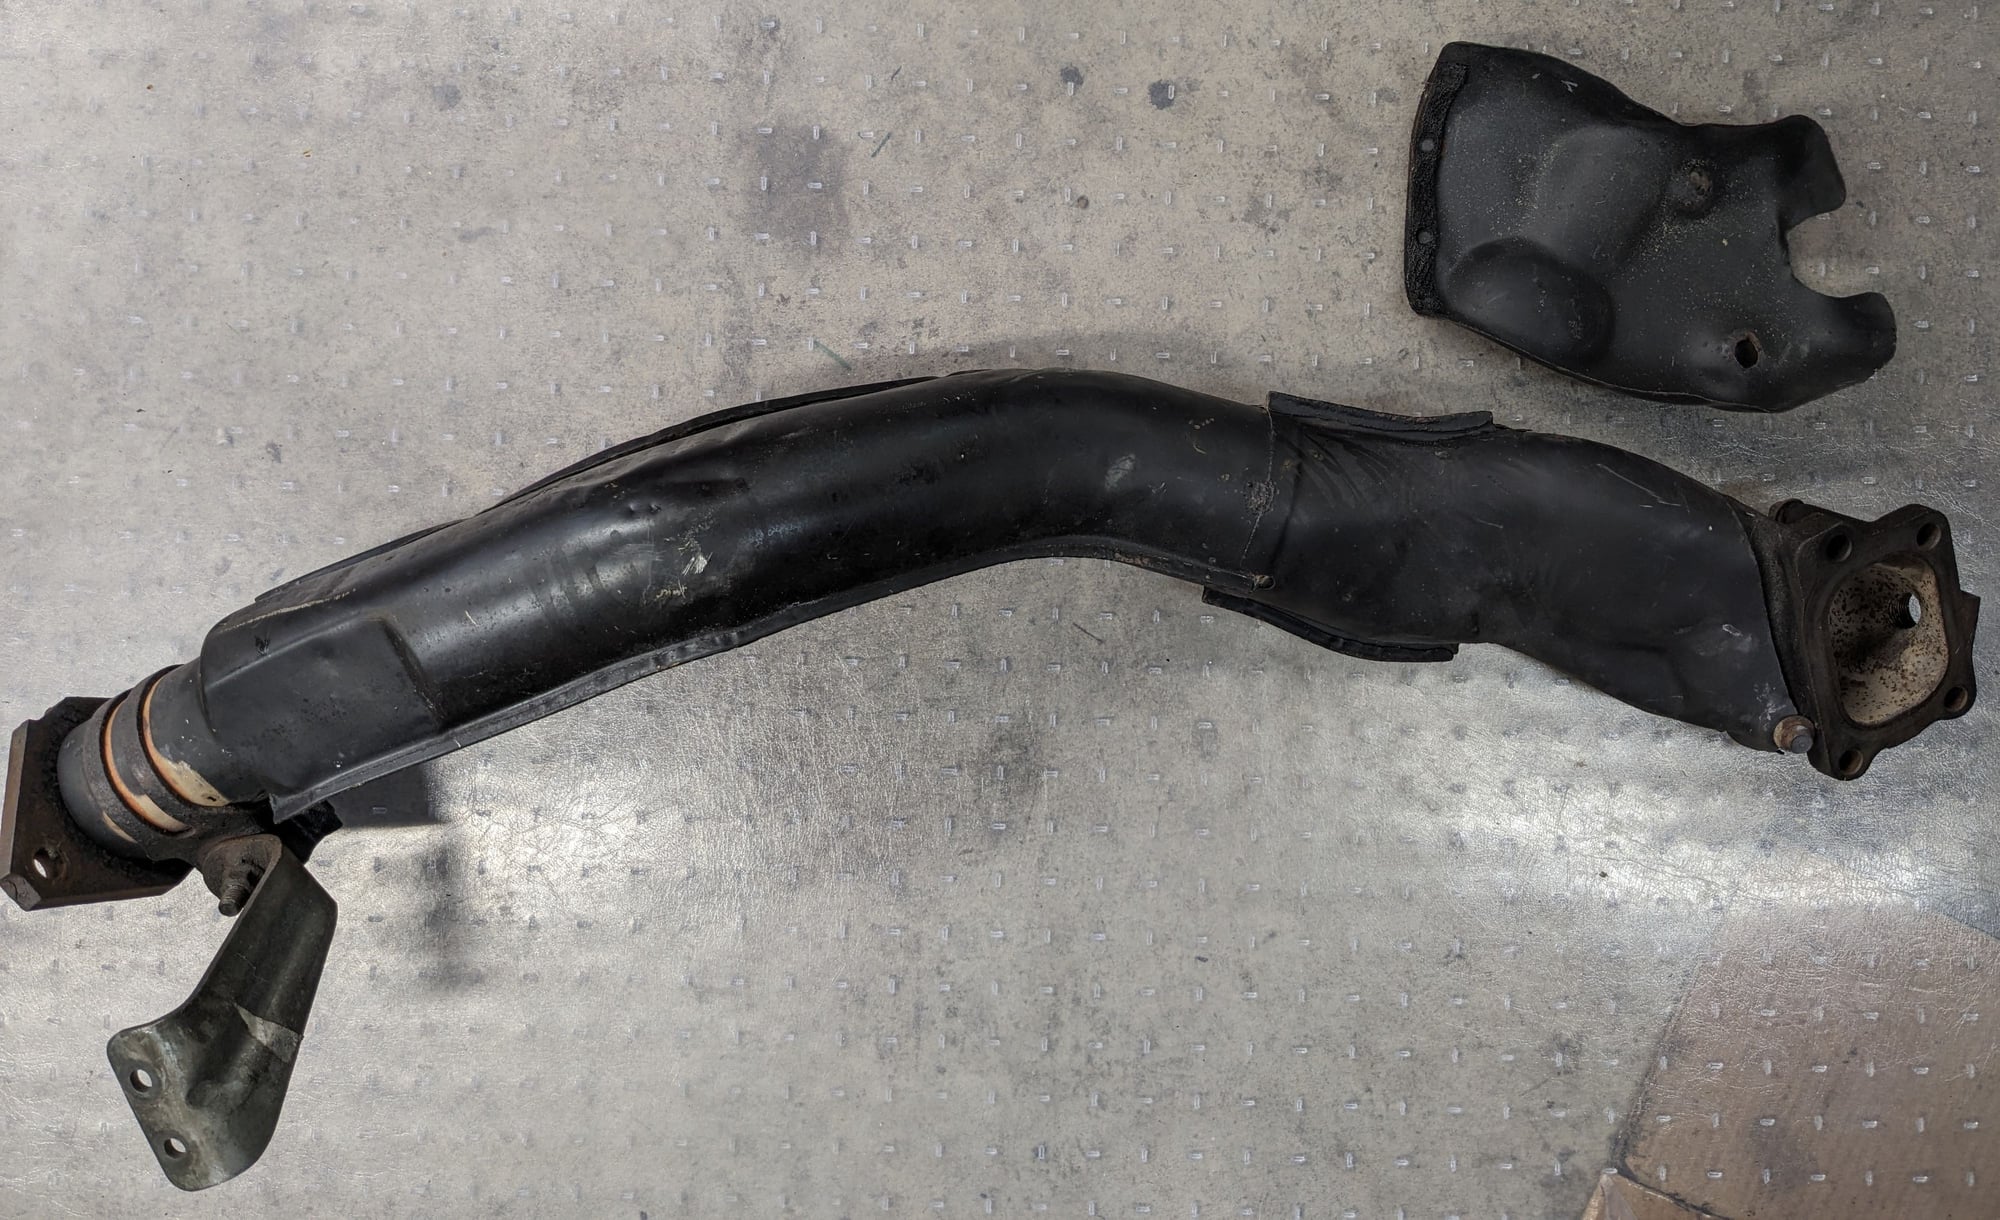 Engine - Exhaust - FD JDM OE downpipe with heatshields - Used - Roselle, IL 60172, United States